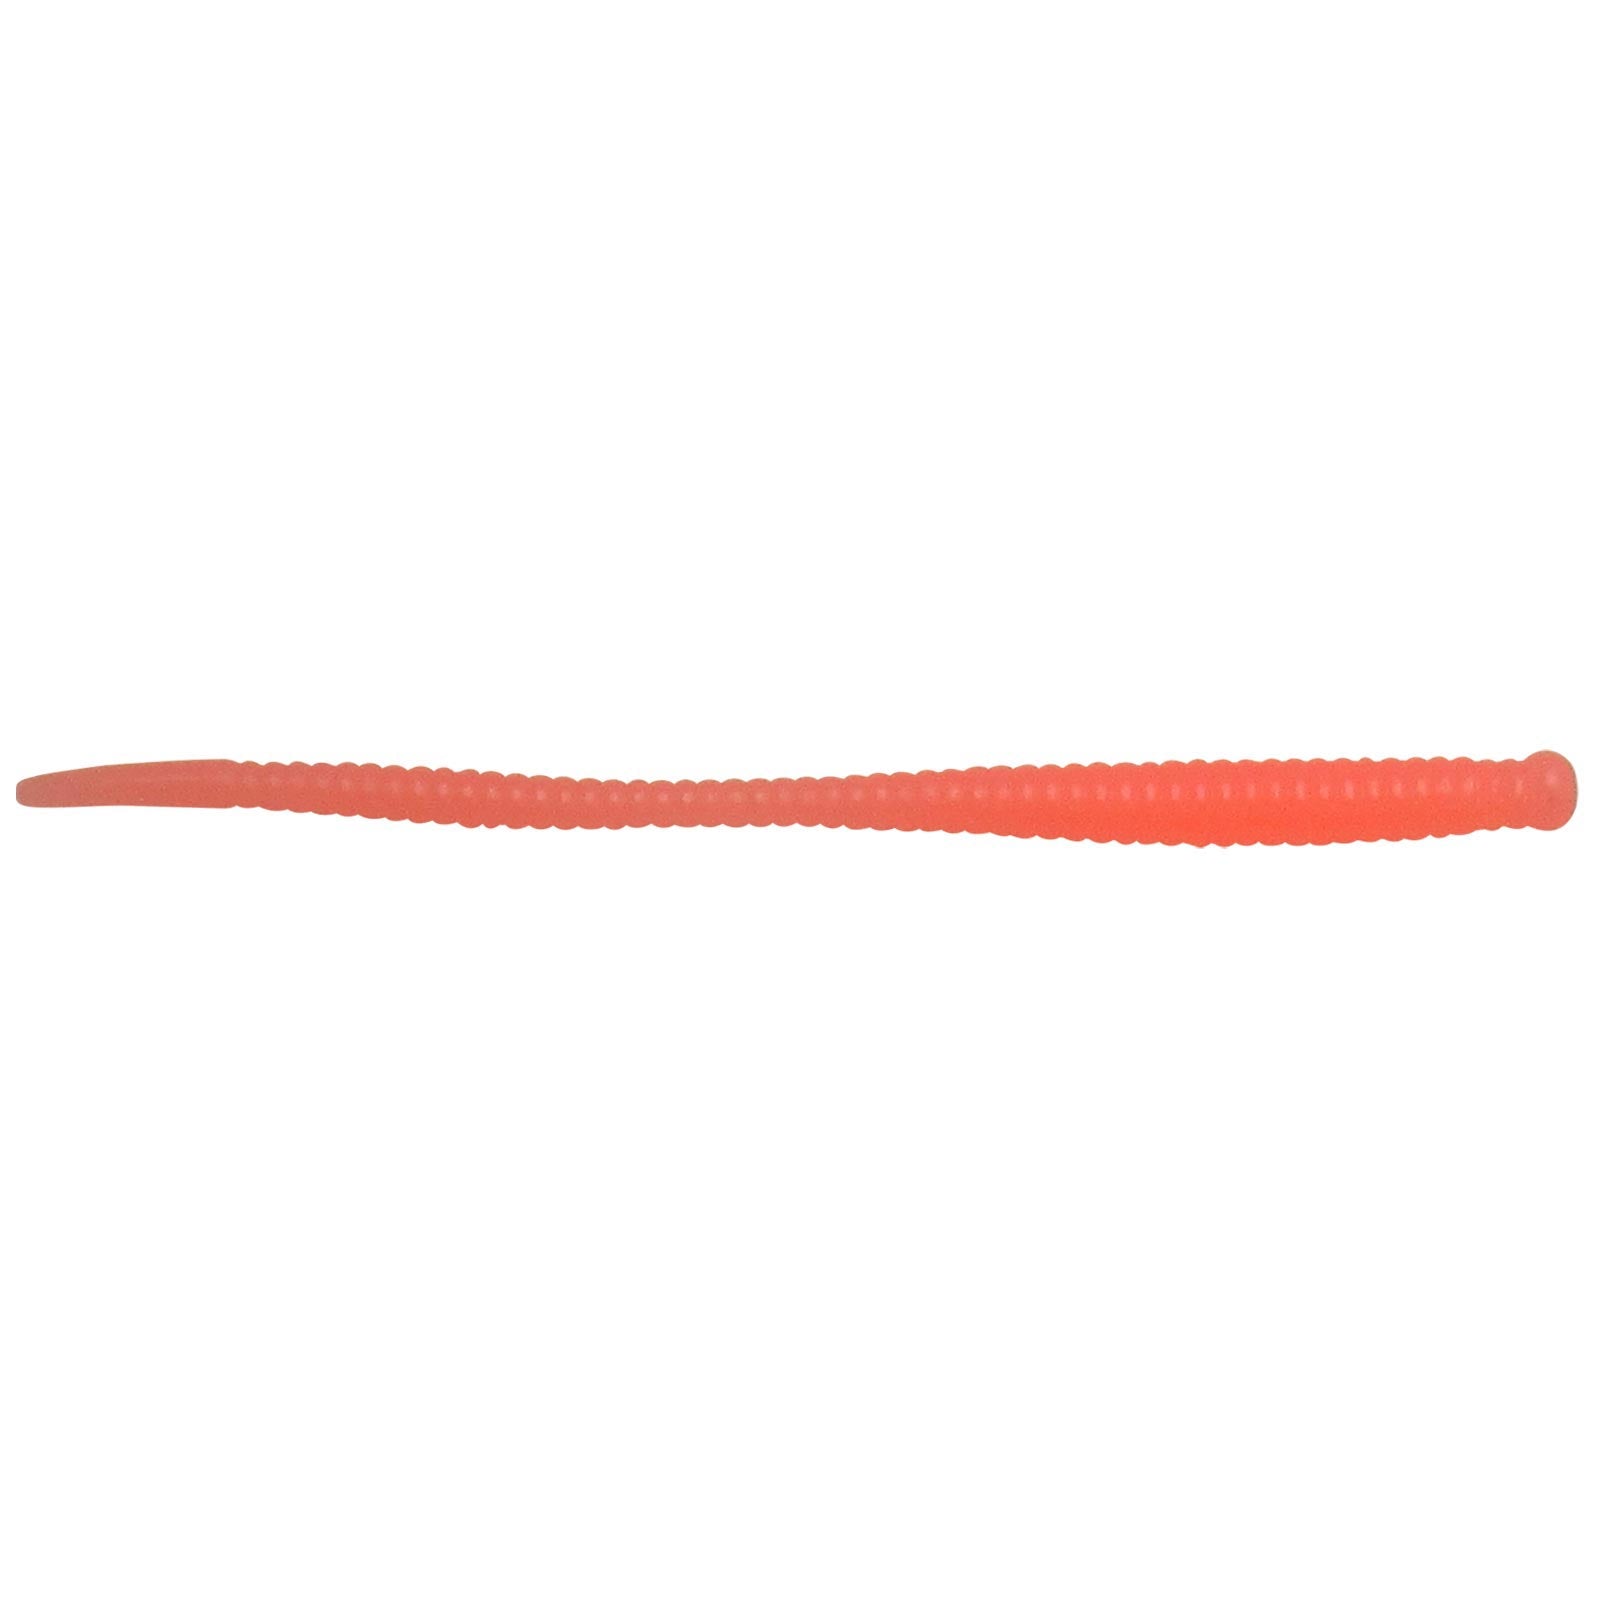 Pautzke Fworm/Pch Fire Worms Peach 15 Count 2 ? Inches